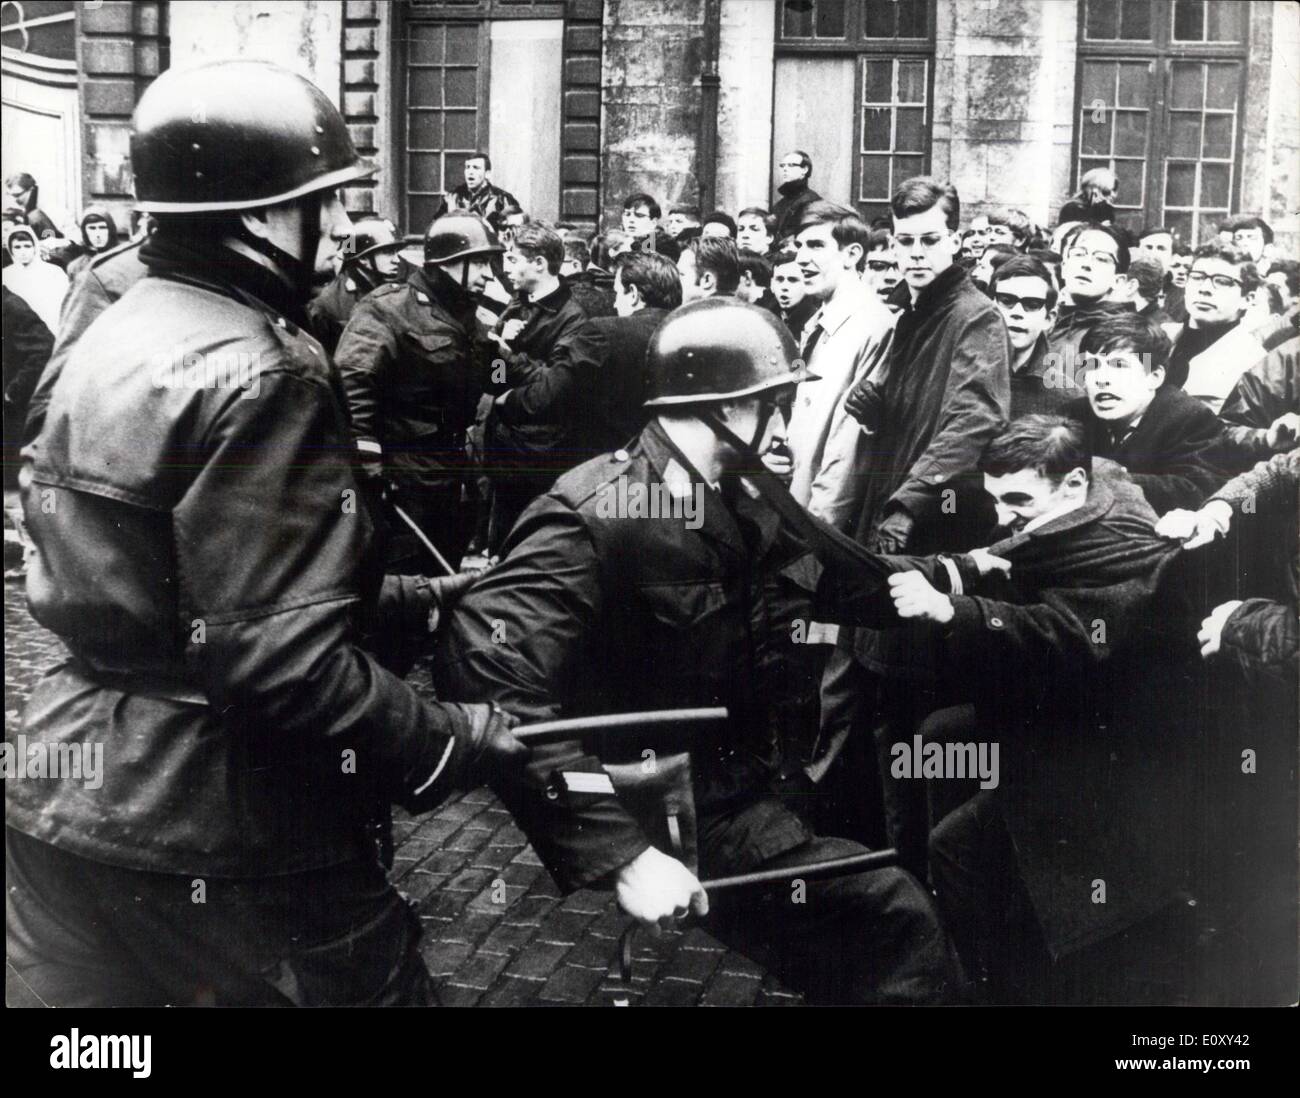 Jan. 22, 1968 - Students riot at Louvain ? Flemmish and French speaking Belgians are again at each other?s throats. Flemmish students at the ancient Catholic university of Louvain take violent exception to the introduction of French into some of the faculties. Louvain, they claim, is Flemmish soil; and the university therefore must be maintained as a Flemmish preserve. French speaking students and staff should emigrate to Wallonie. Police and clergy (behind the scenes) have yet to find a solution to this new twist of the age-old feud Stock Photo